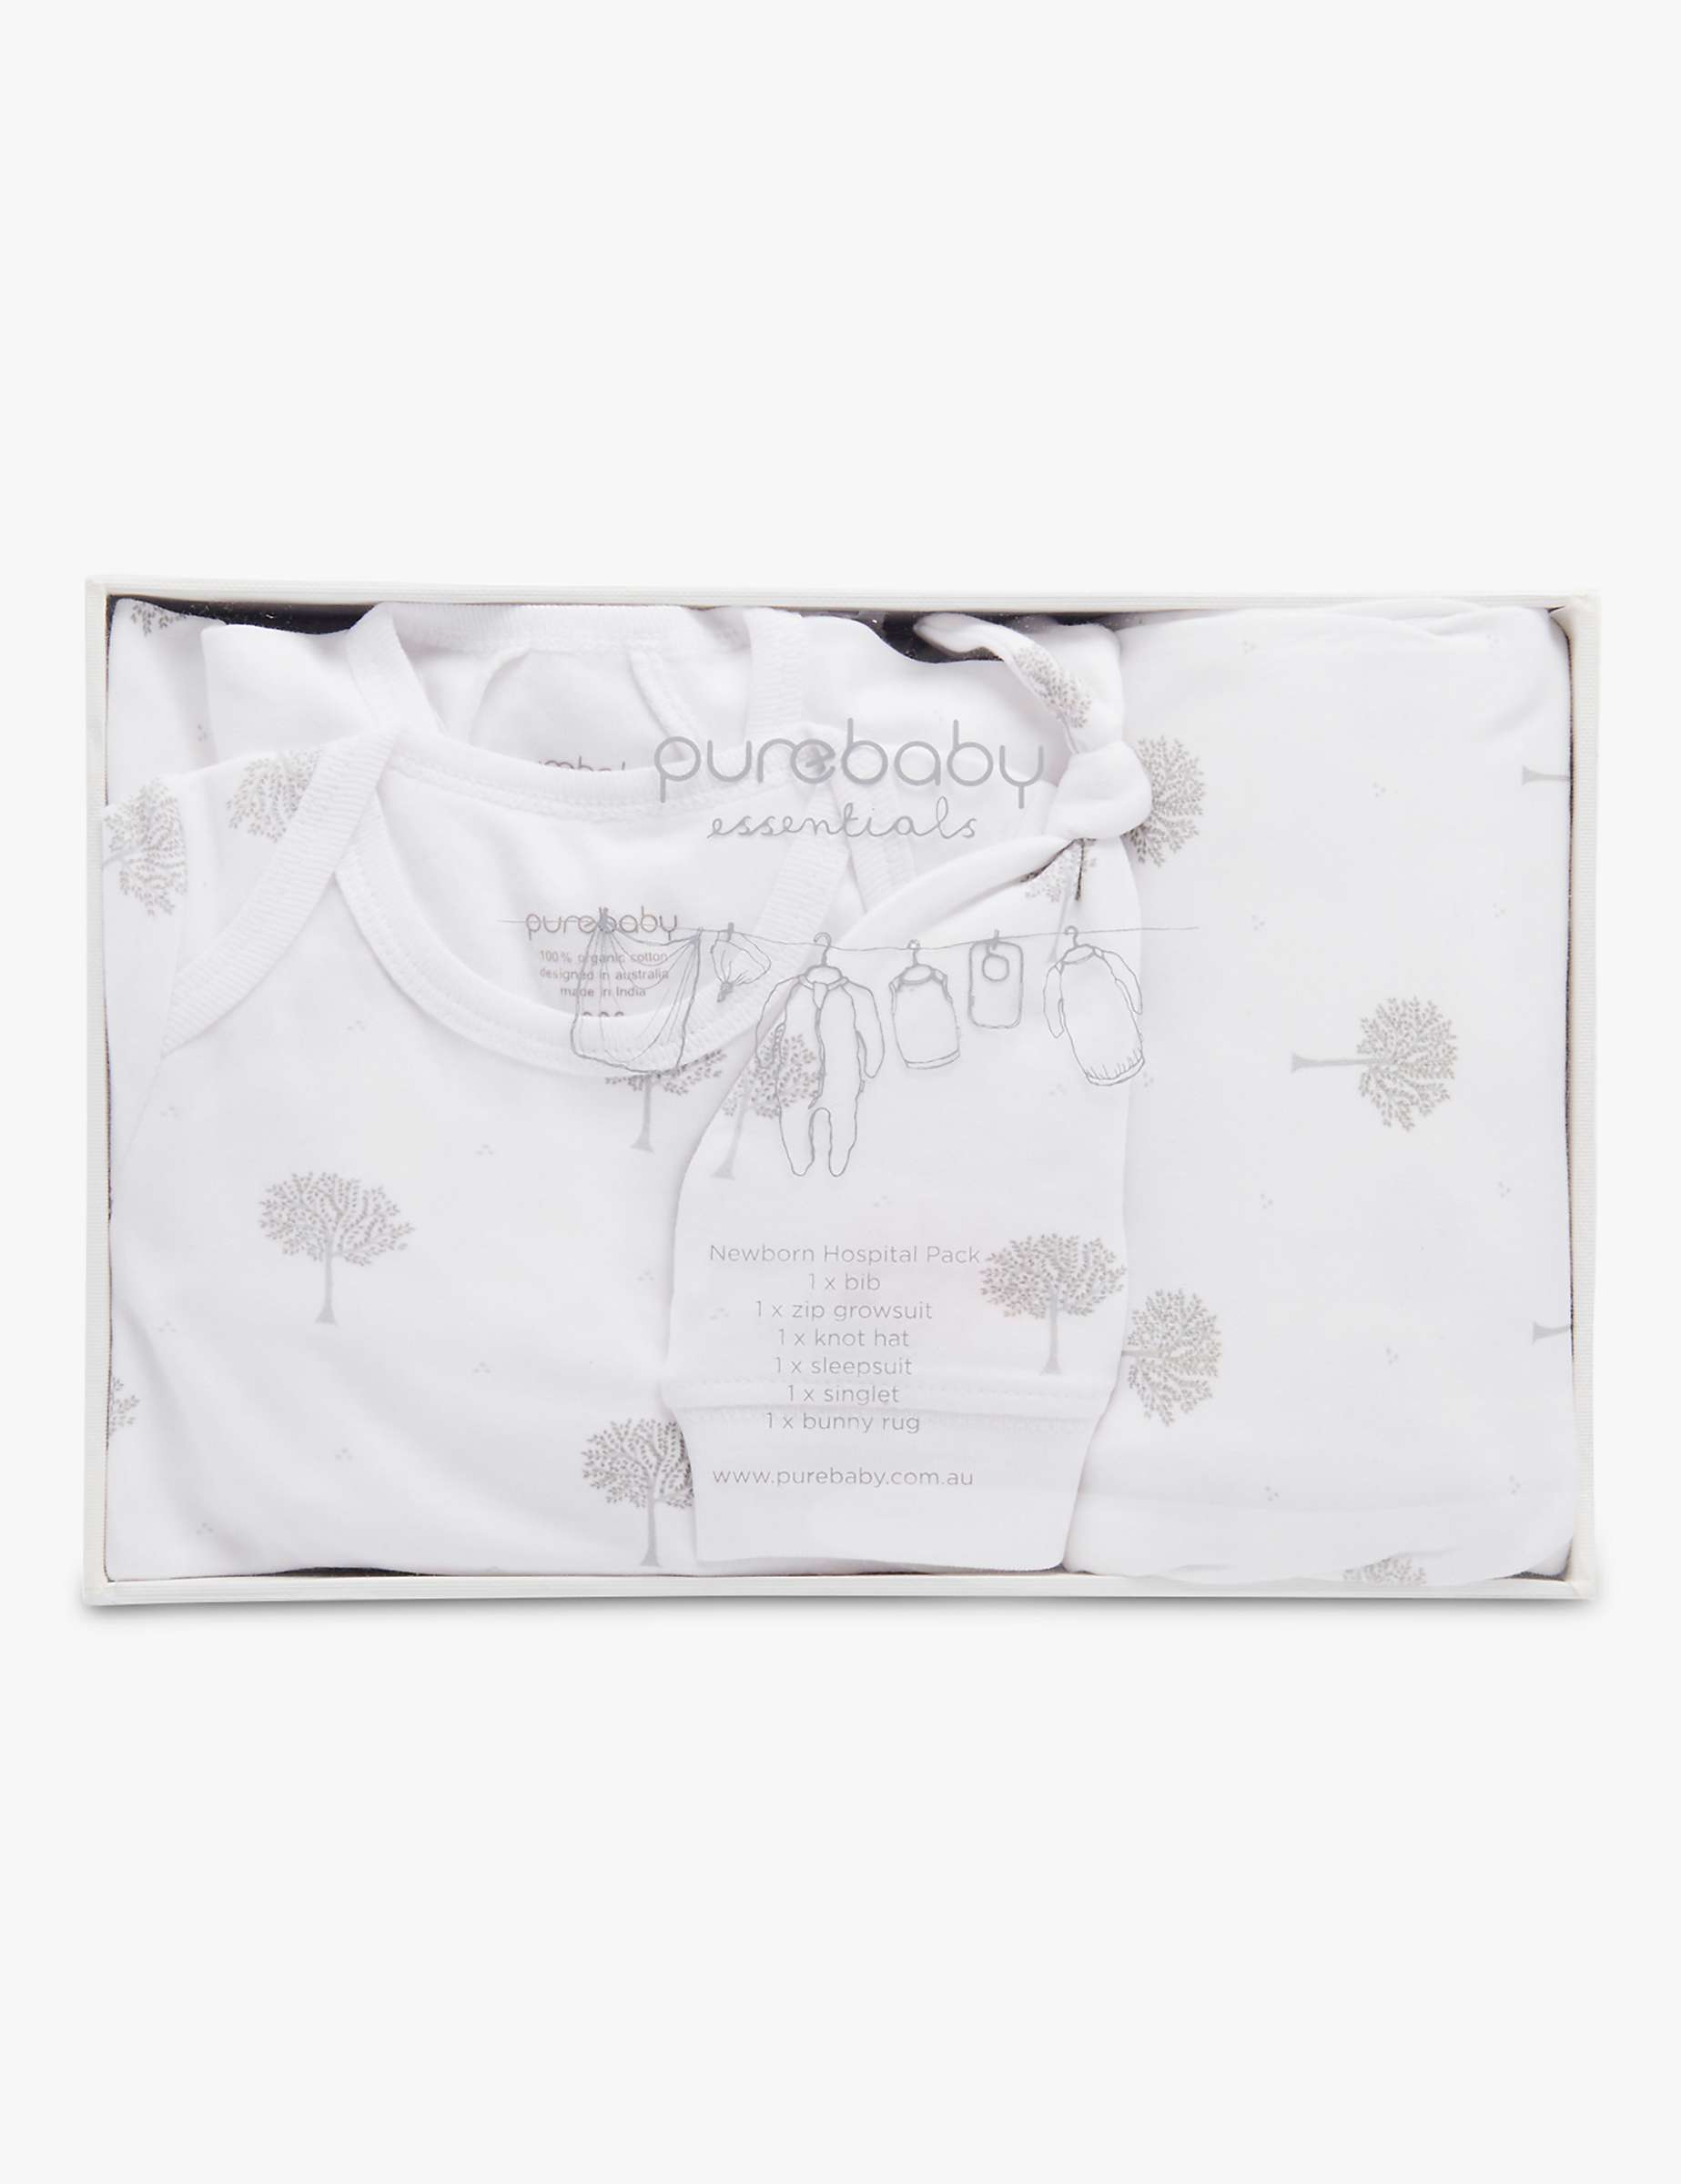 Buy Purebaby Organic Cotton Essentials Collection Newborn Hospital Gift Set, Pack of 6, White Online at johnlewis.com